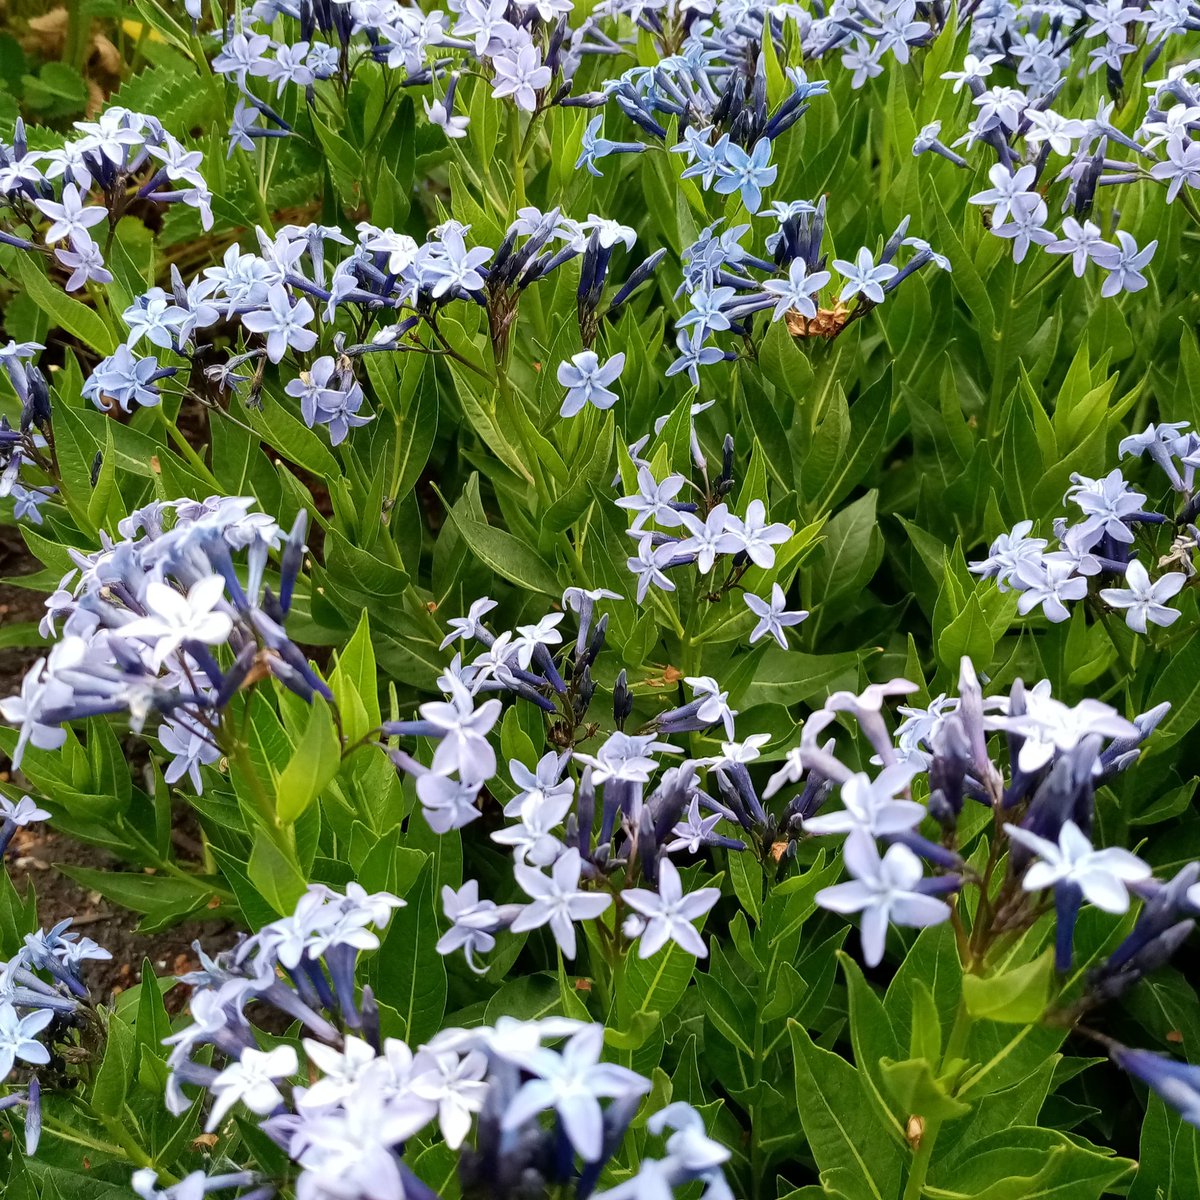 The very lovely Amsonia 'Blue Ice'  flowering in Small Acre today.

#plants #plantfair #specialistnurseries #gardens #opengardens #perennials #somerset #amsonia